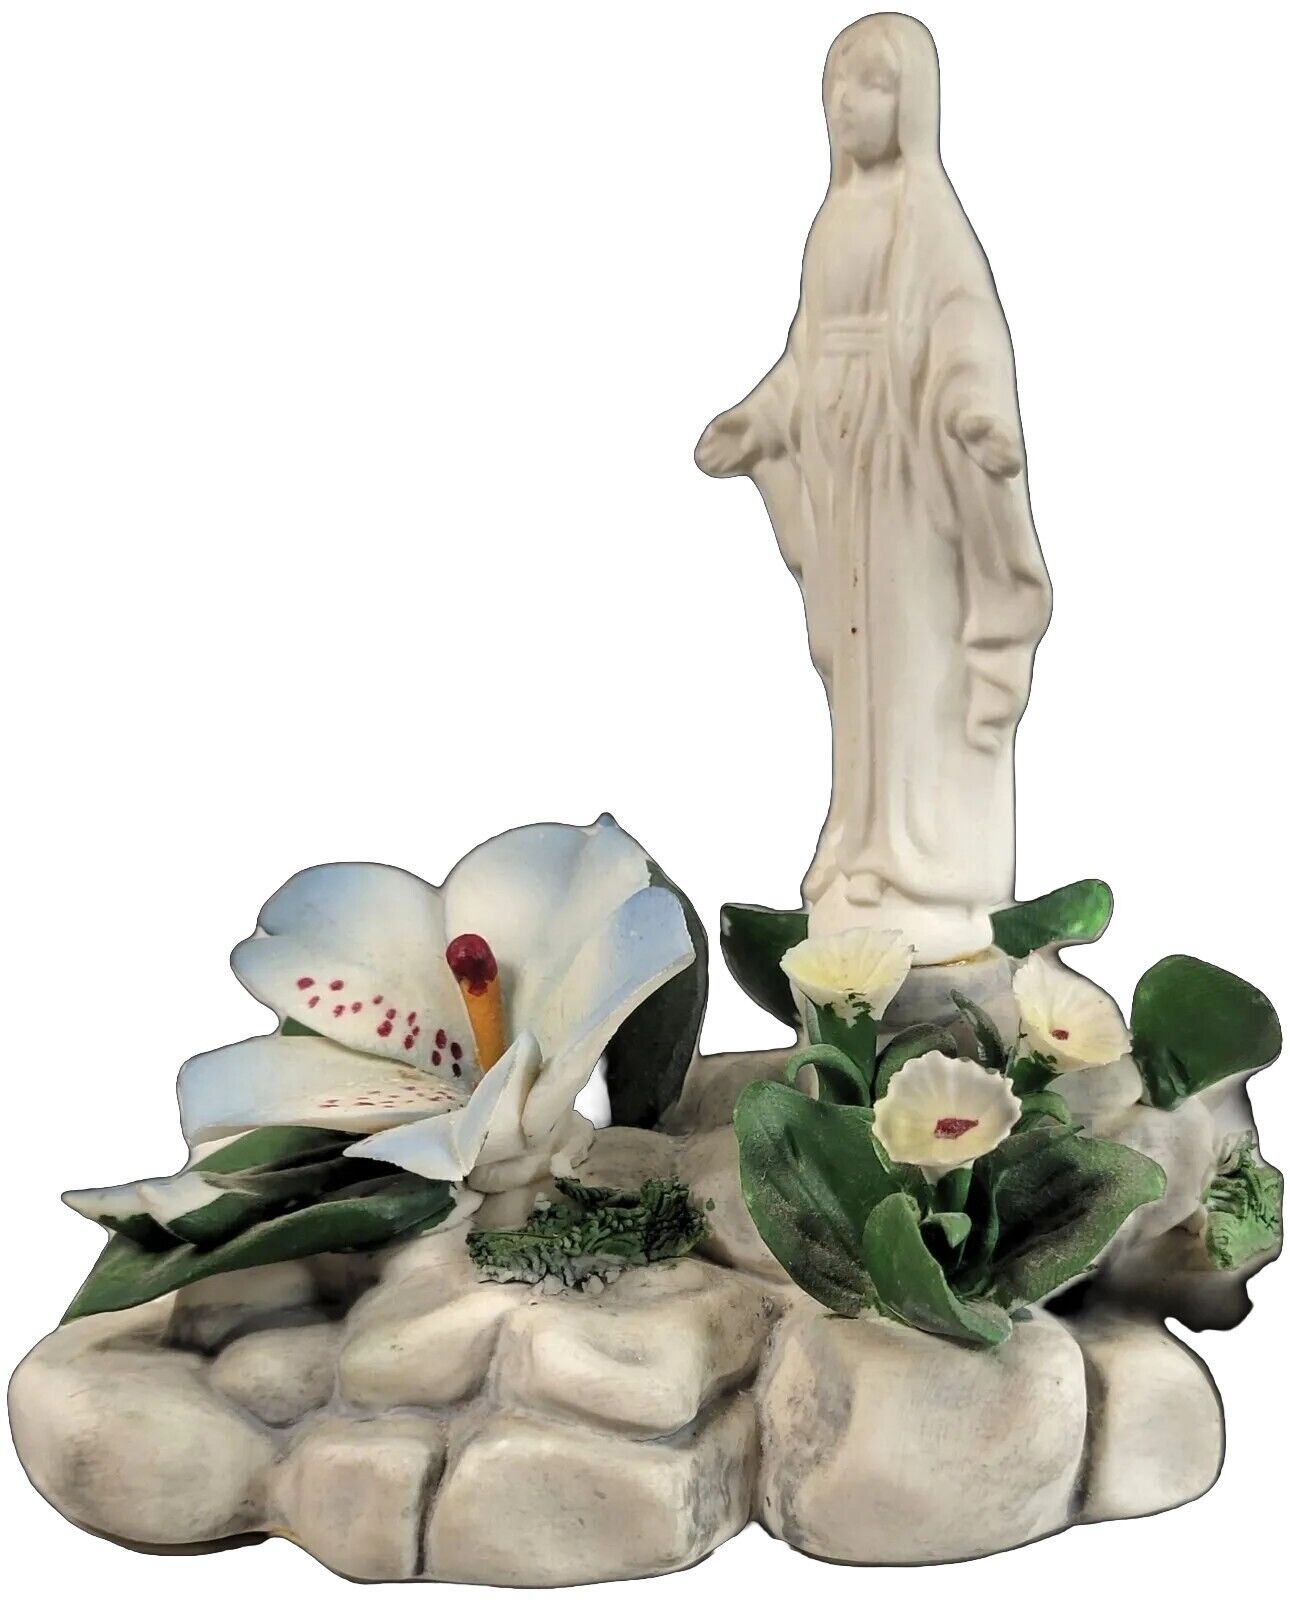 Blessed Virgin Mother Mary Madonna Figurine Capodimonte Porcelain Made In Italy